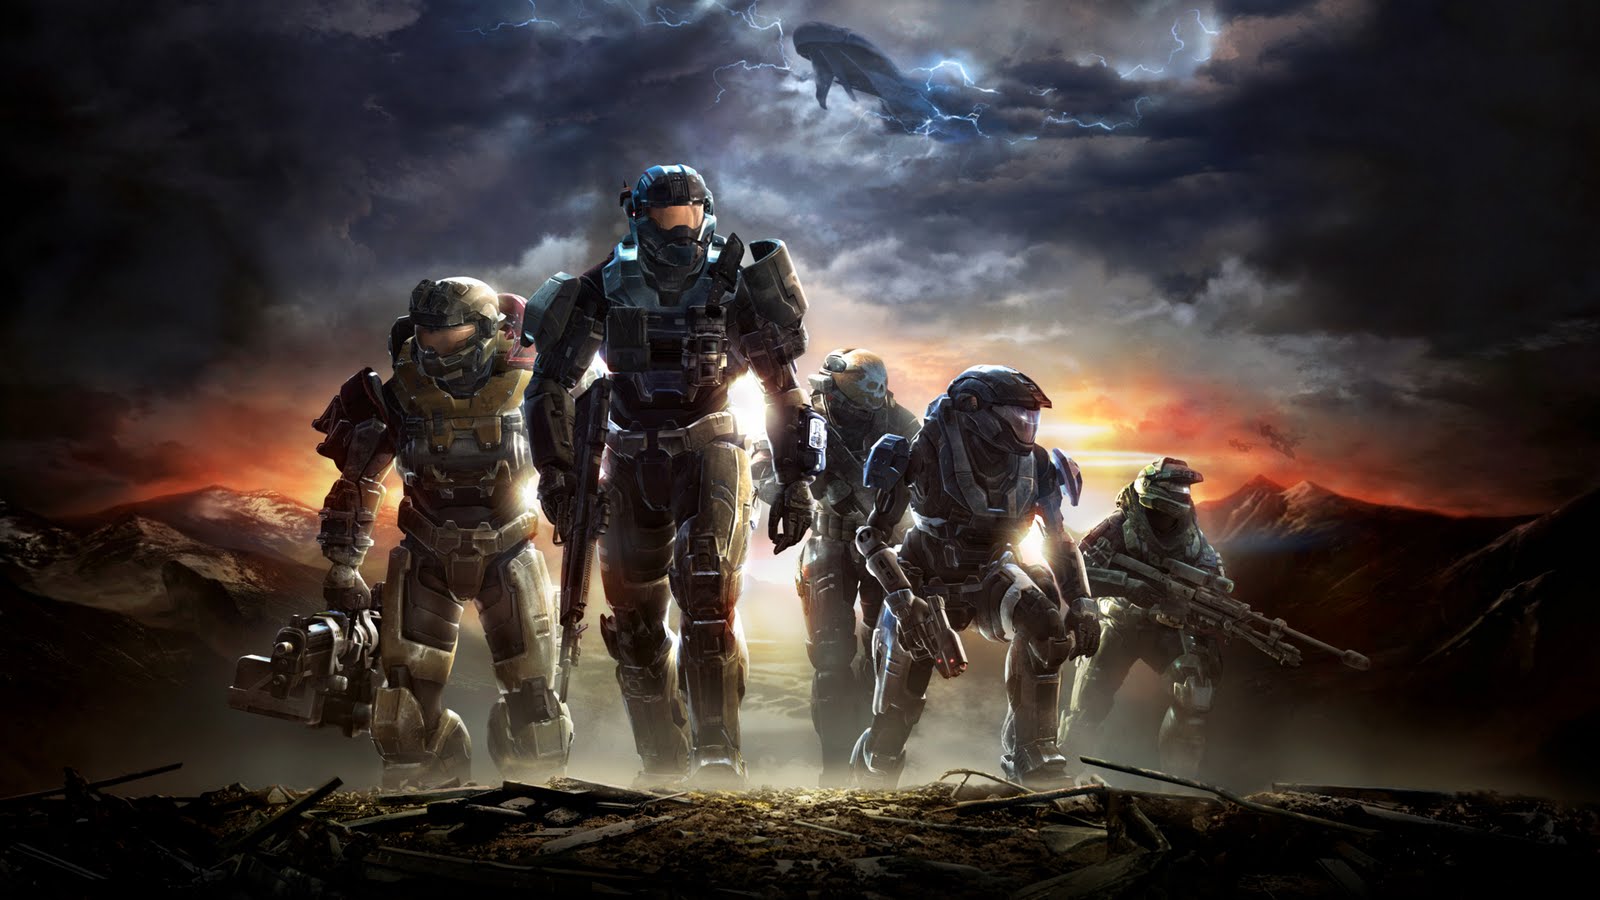 Halo 3 wallpaper 1080p Clickandseeworld is all about FunnyAmazing 1600x900